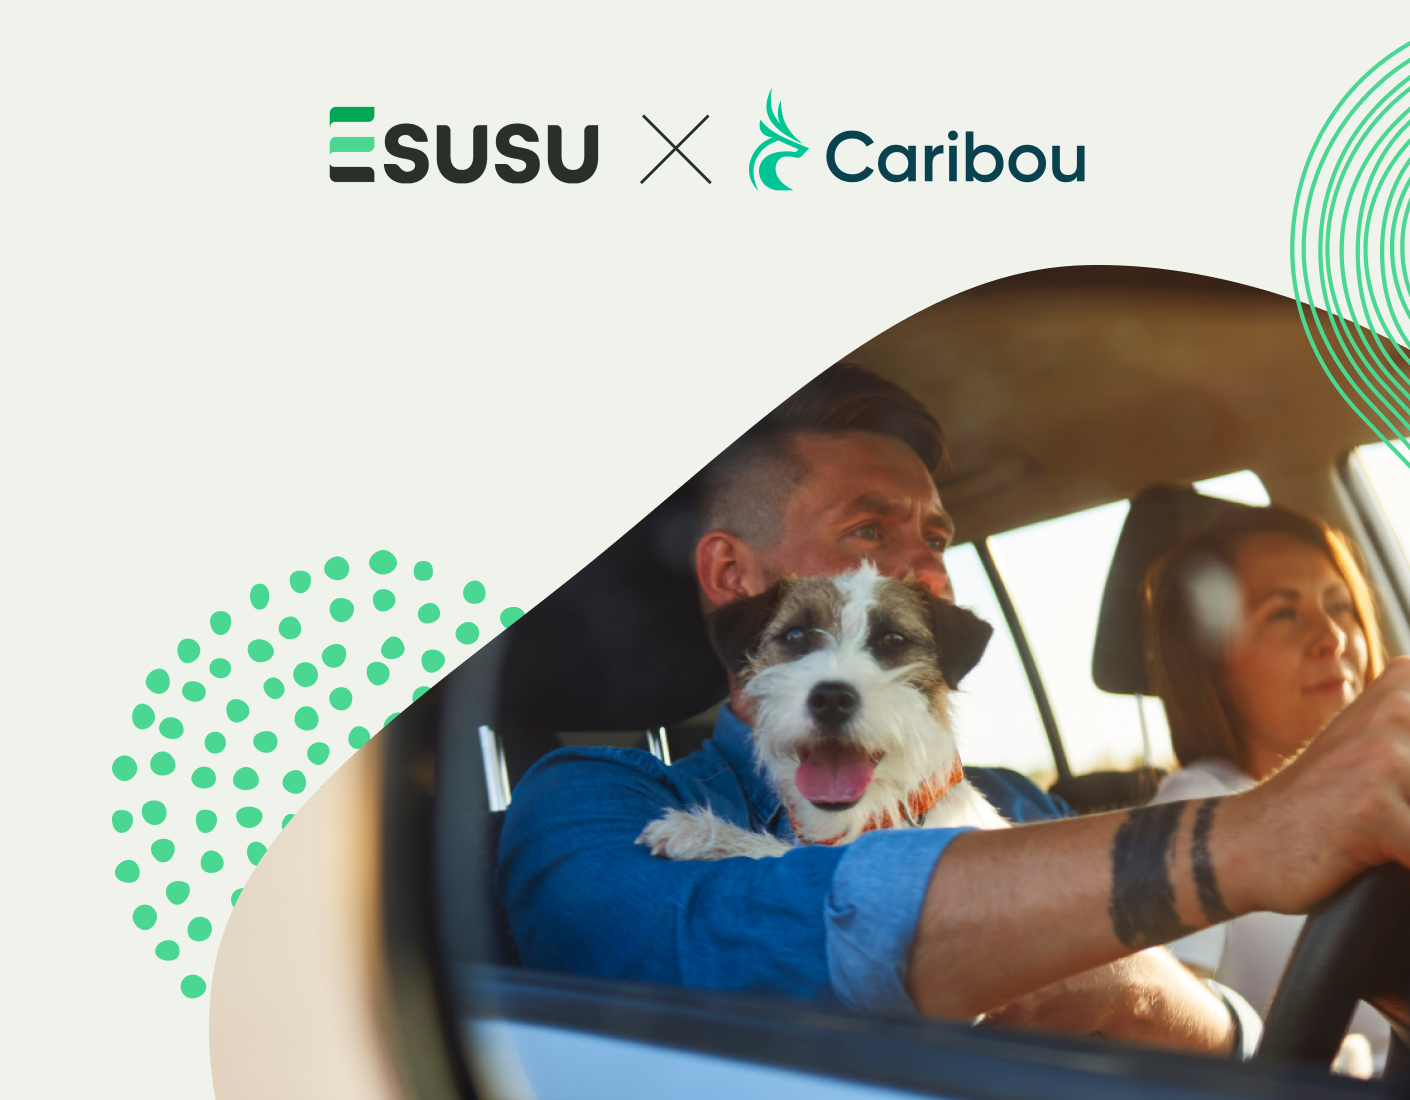 Esusu and Caribou logos over a stylized background of a couple driving in a car with a puppy in their arms.